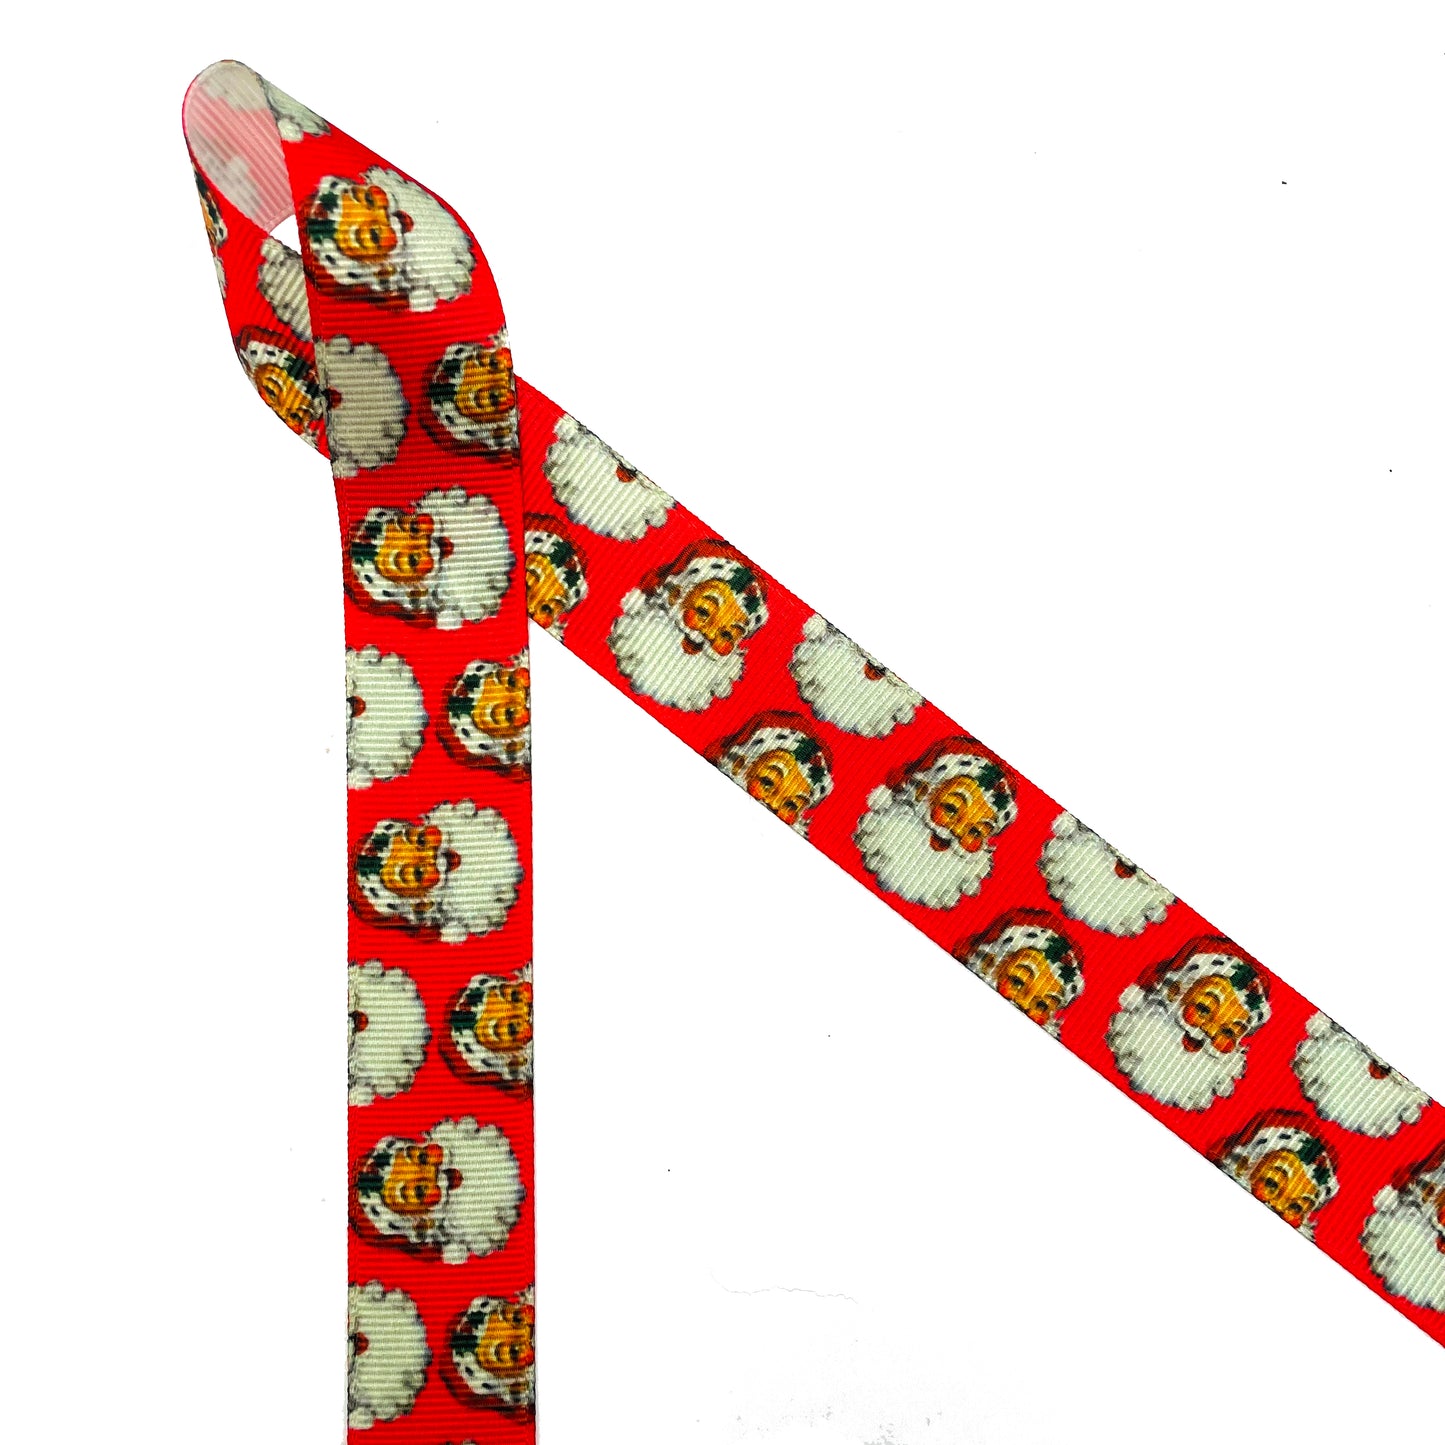 Vintage Santa Claus Ribbon on a red background  printed on 7/8" White Single face satin and grosgrain